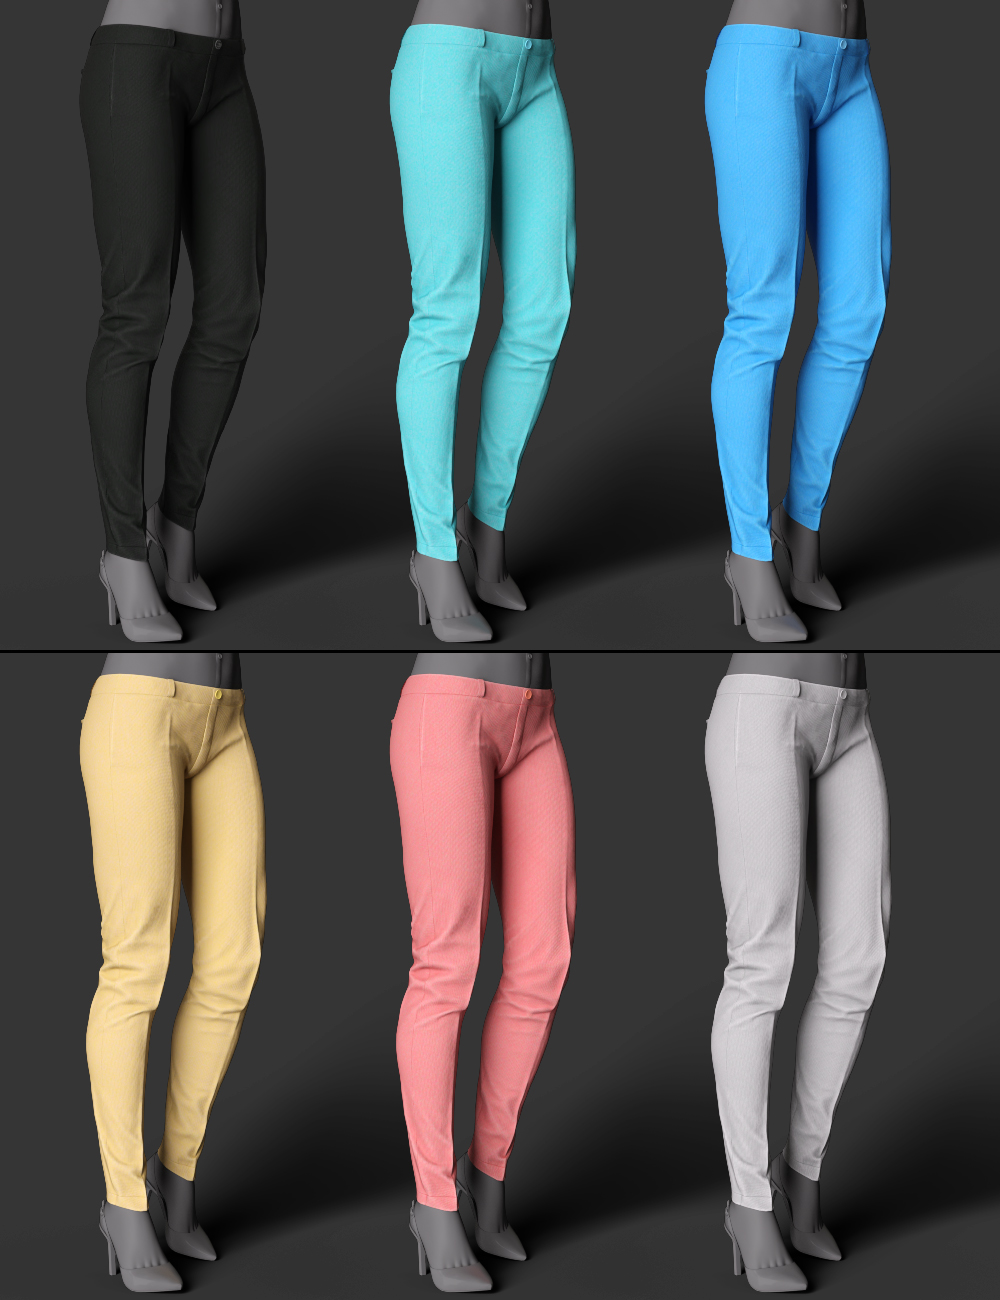 MDU dForce Trousers for Genesis 8 and 8.1 Females by: chungdan, 3D Models by Daz 3D